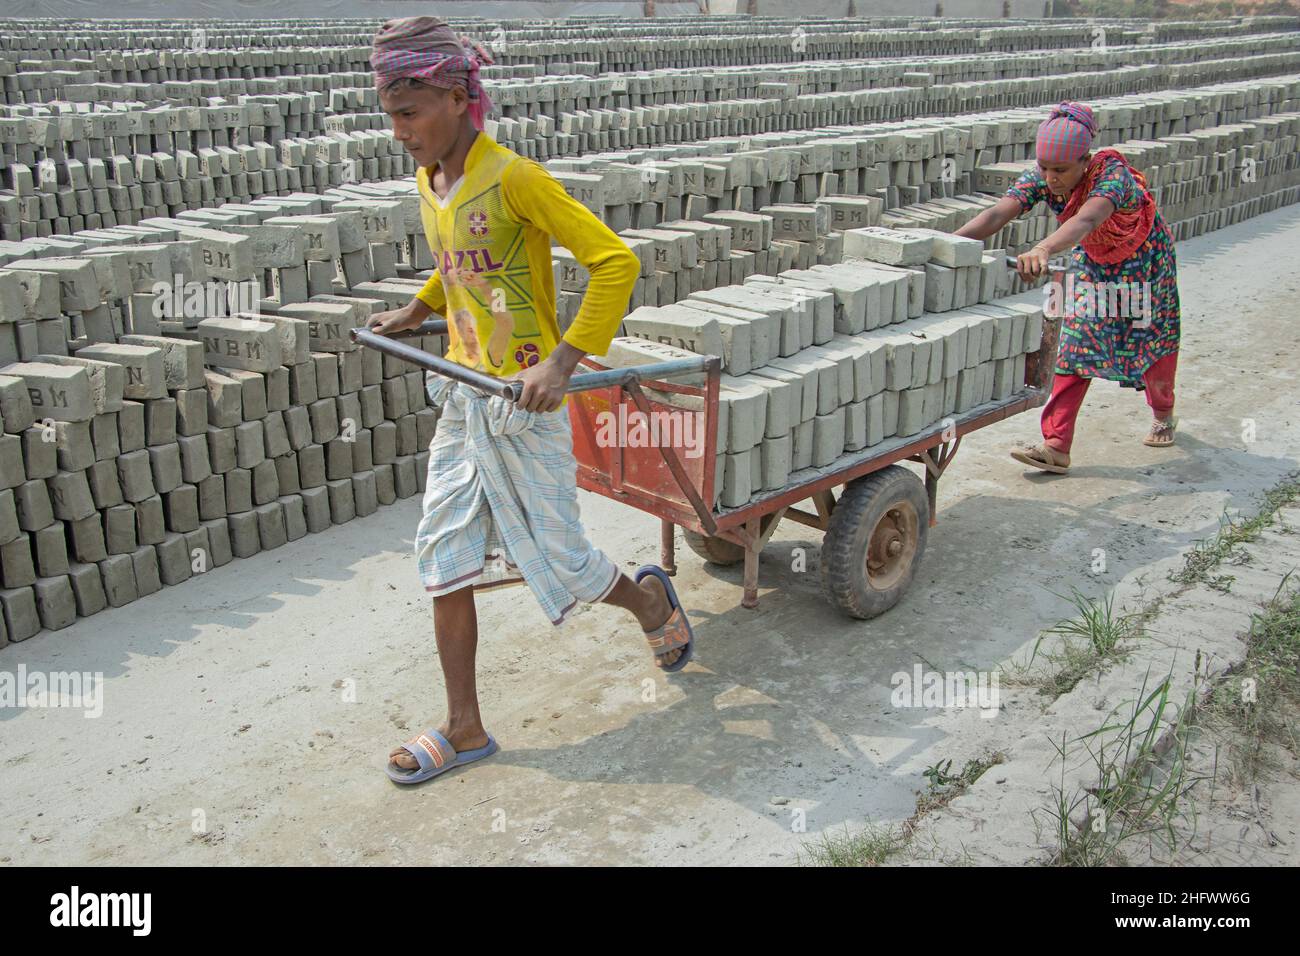 Narayanganj, Dhaka, Bangladesh. 18th Jan, 2022. Workers are carrying bricks on a trolly in a brick field in Narayanganj, Bangladesh. Bangladesh, with its 160 million inhabitants, is a country in constant demand for bricks as the primary material for construction of buildings in the era of urbanization. There are approximately 5000 privately operated brick kilns within Bangladesh, including 1000 around the capital, Dhaka. Brick kilns, indirectly responsible for climate change, emit toxic fumes containing large amounts of carbon monoxide, nitrogen oxide and oxides of Sulphur which are extremel Stock Photo